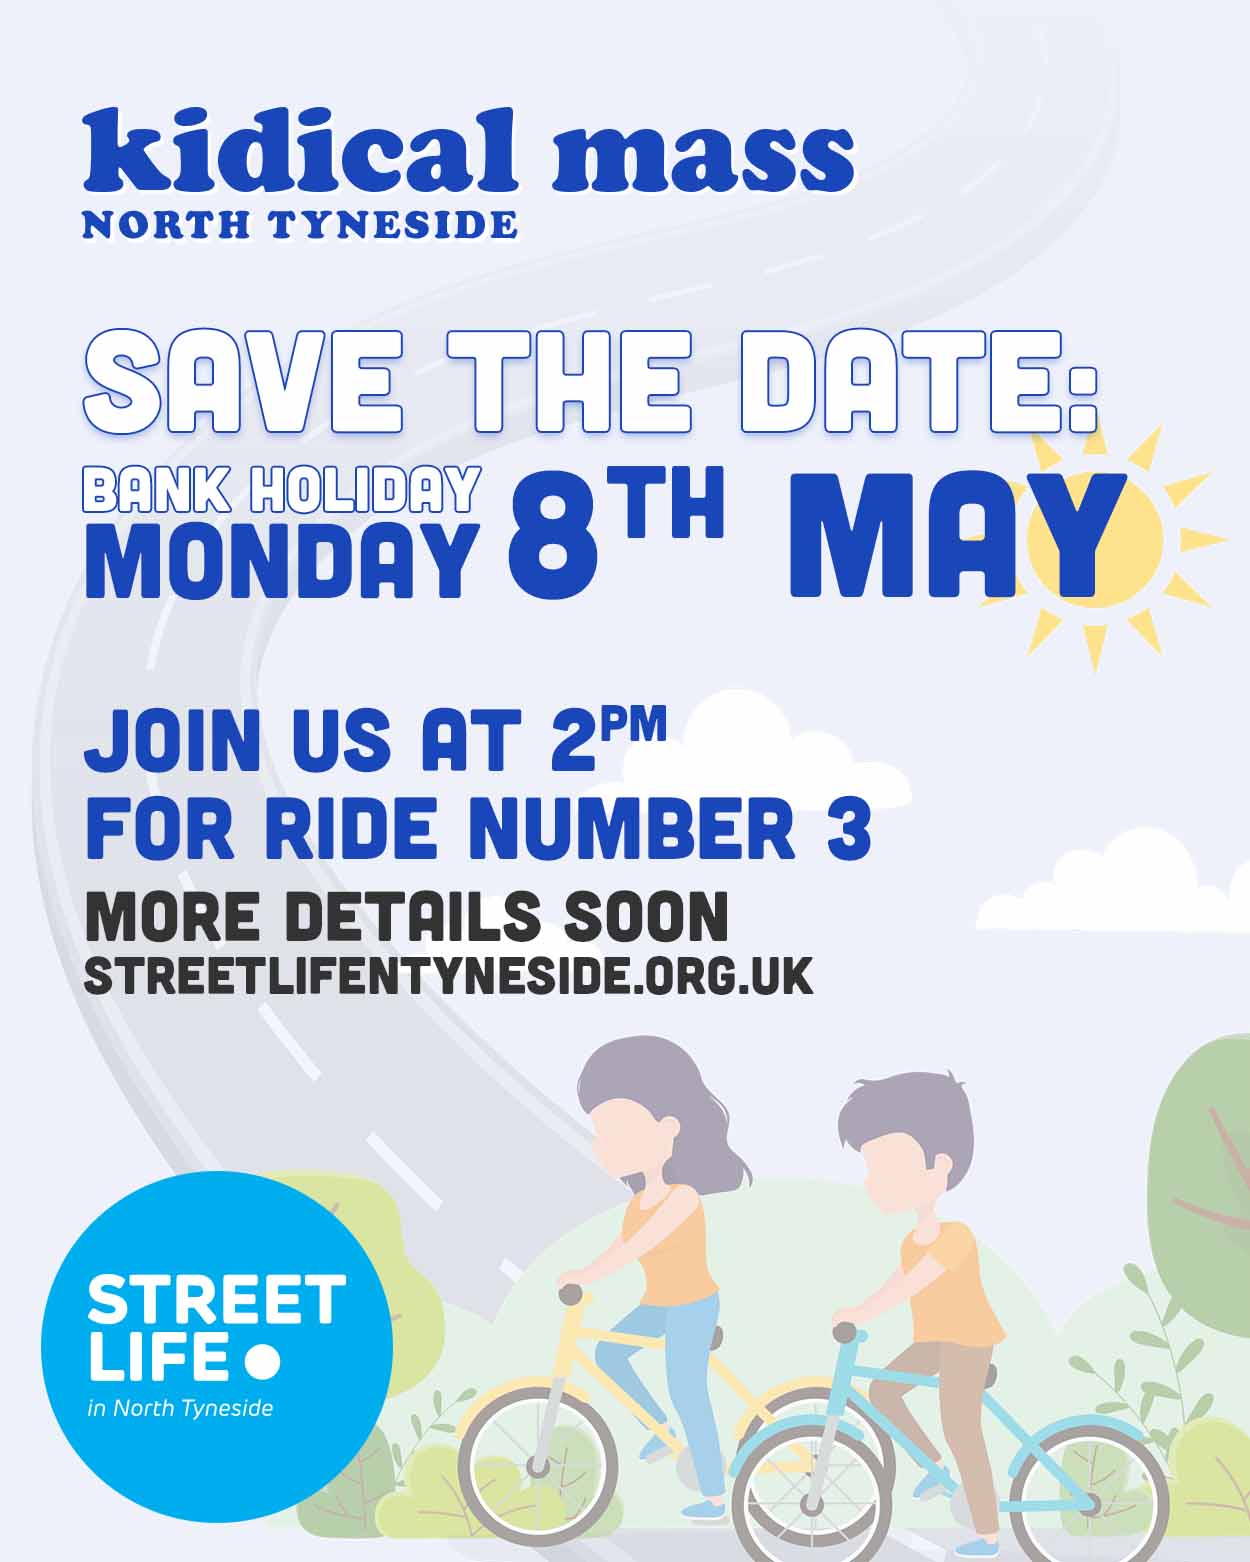 Save the date: our next Kidical Mass ride is on 8th May 2023